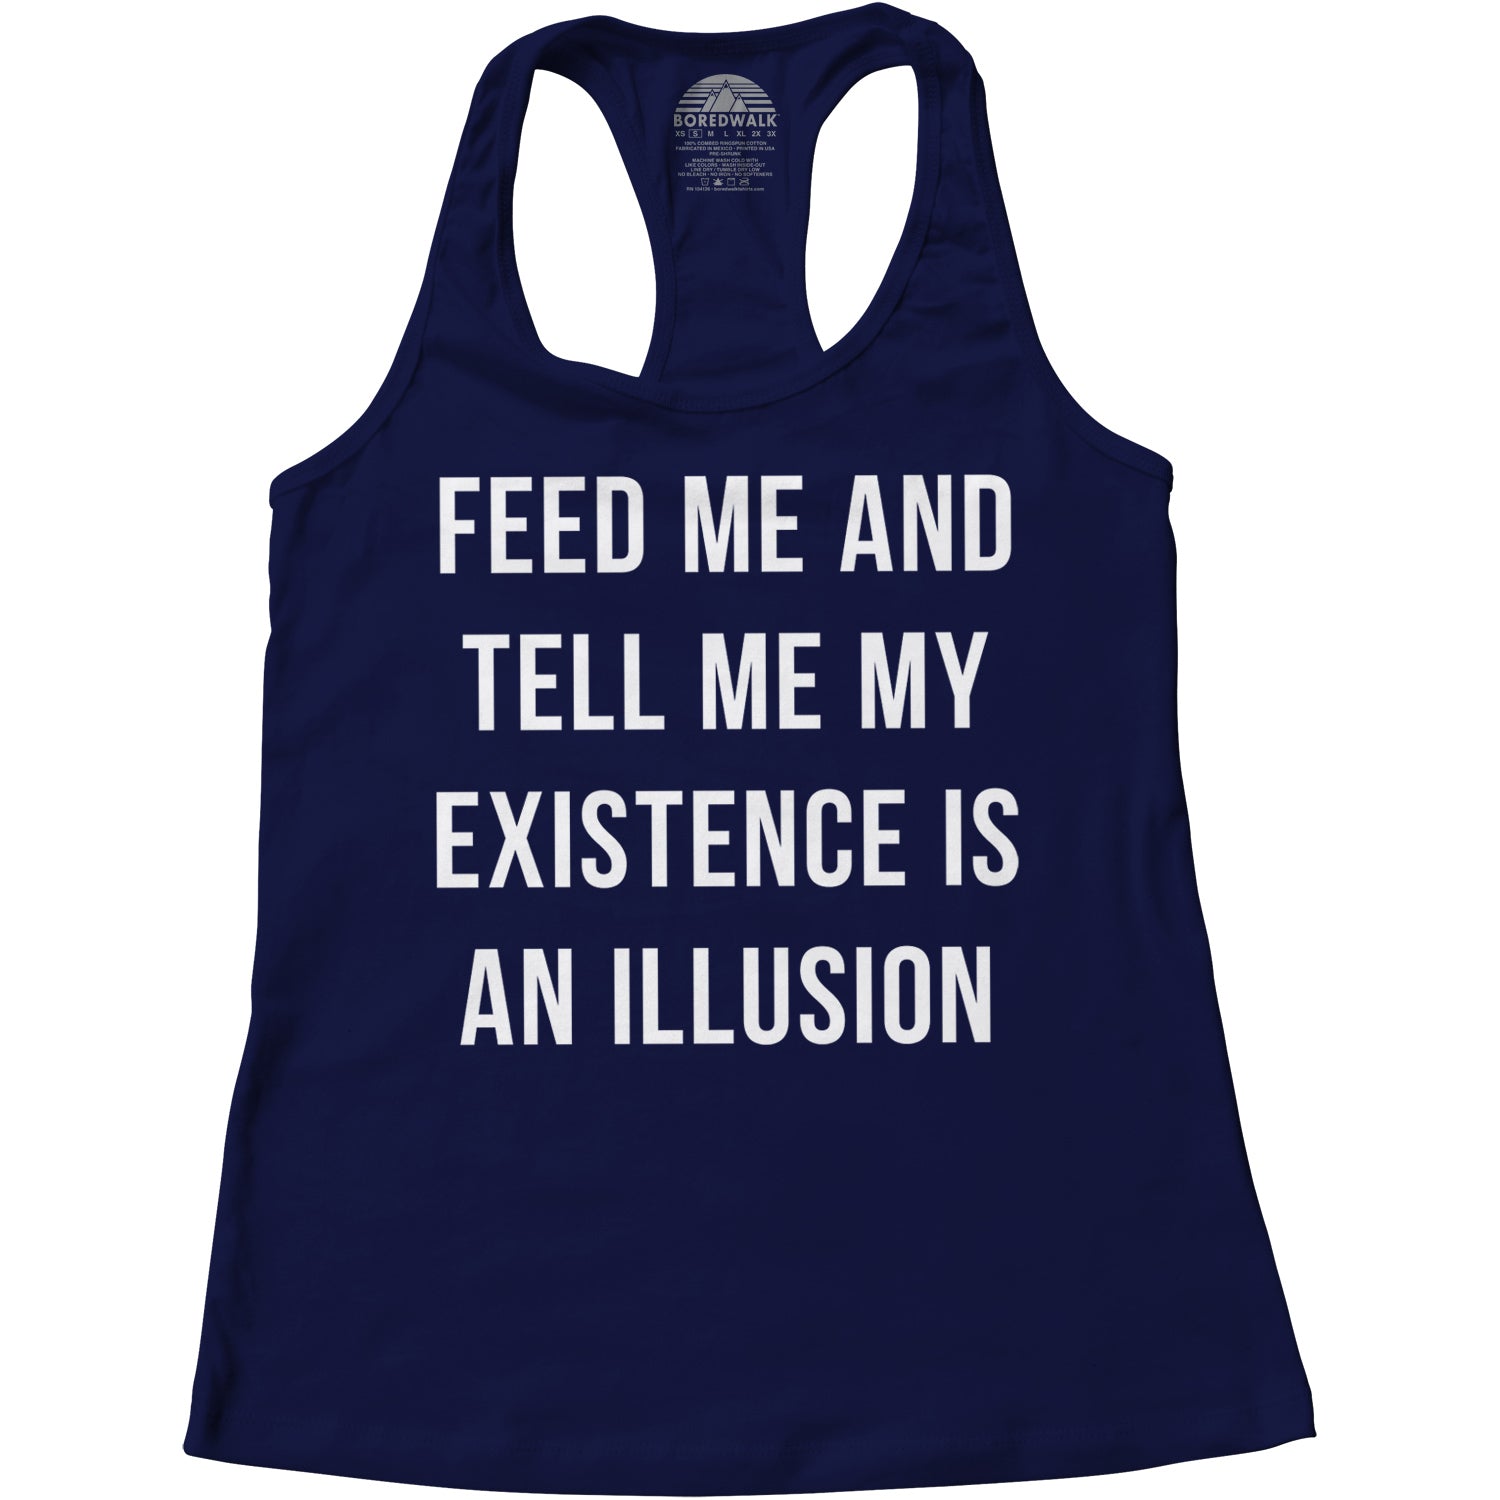 Women's Feed Me and Tell Me My Existence is an Illusion Racerback Tank Top